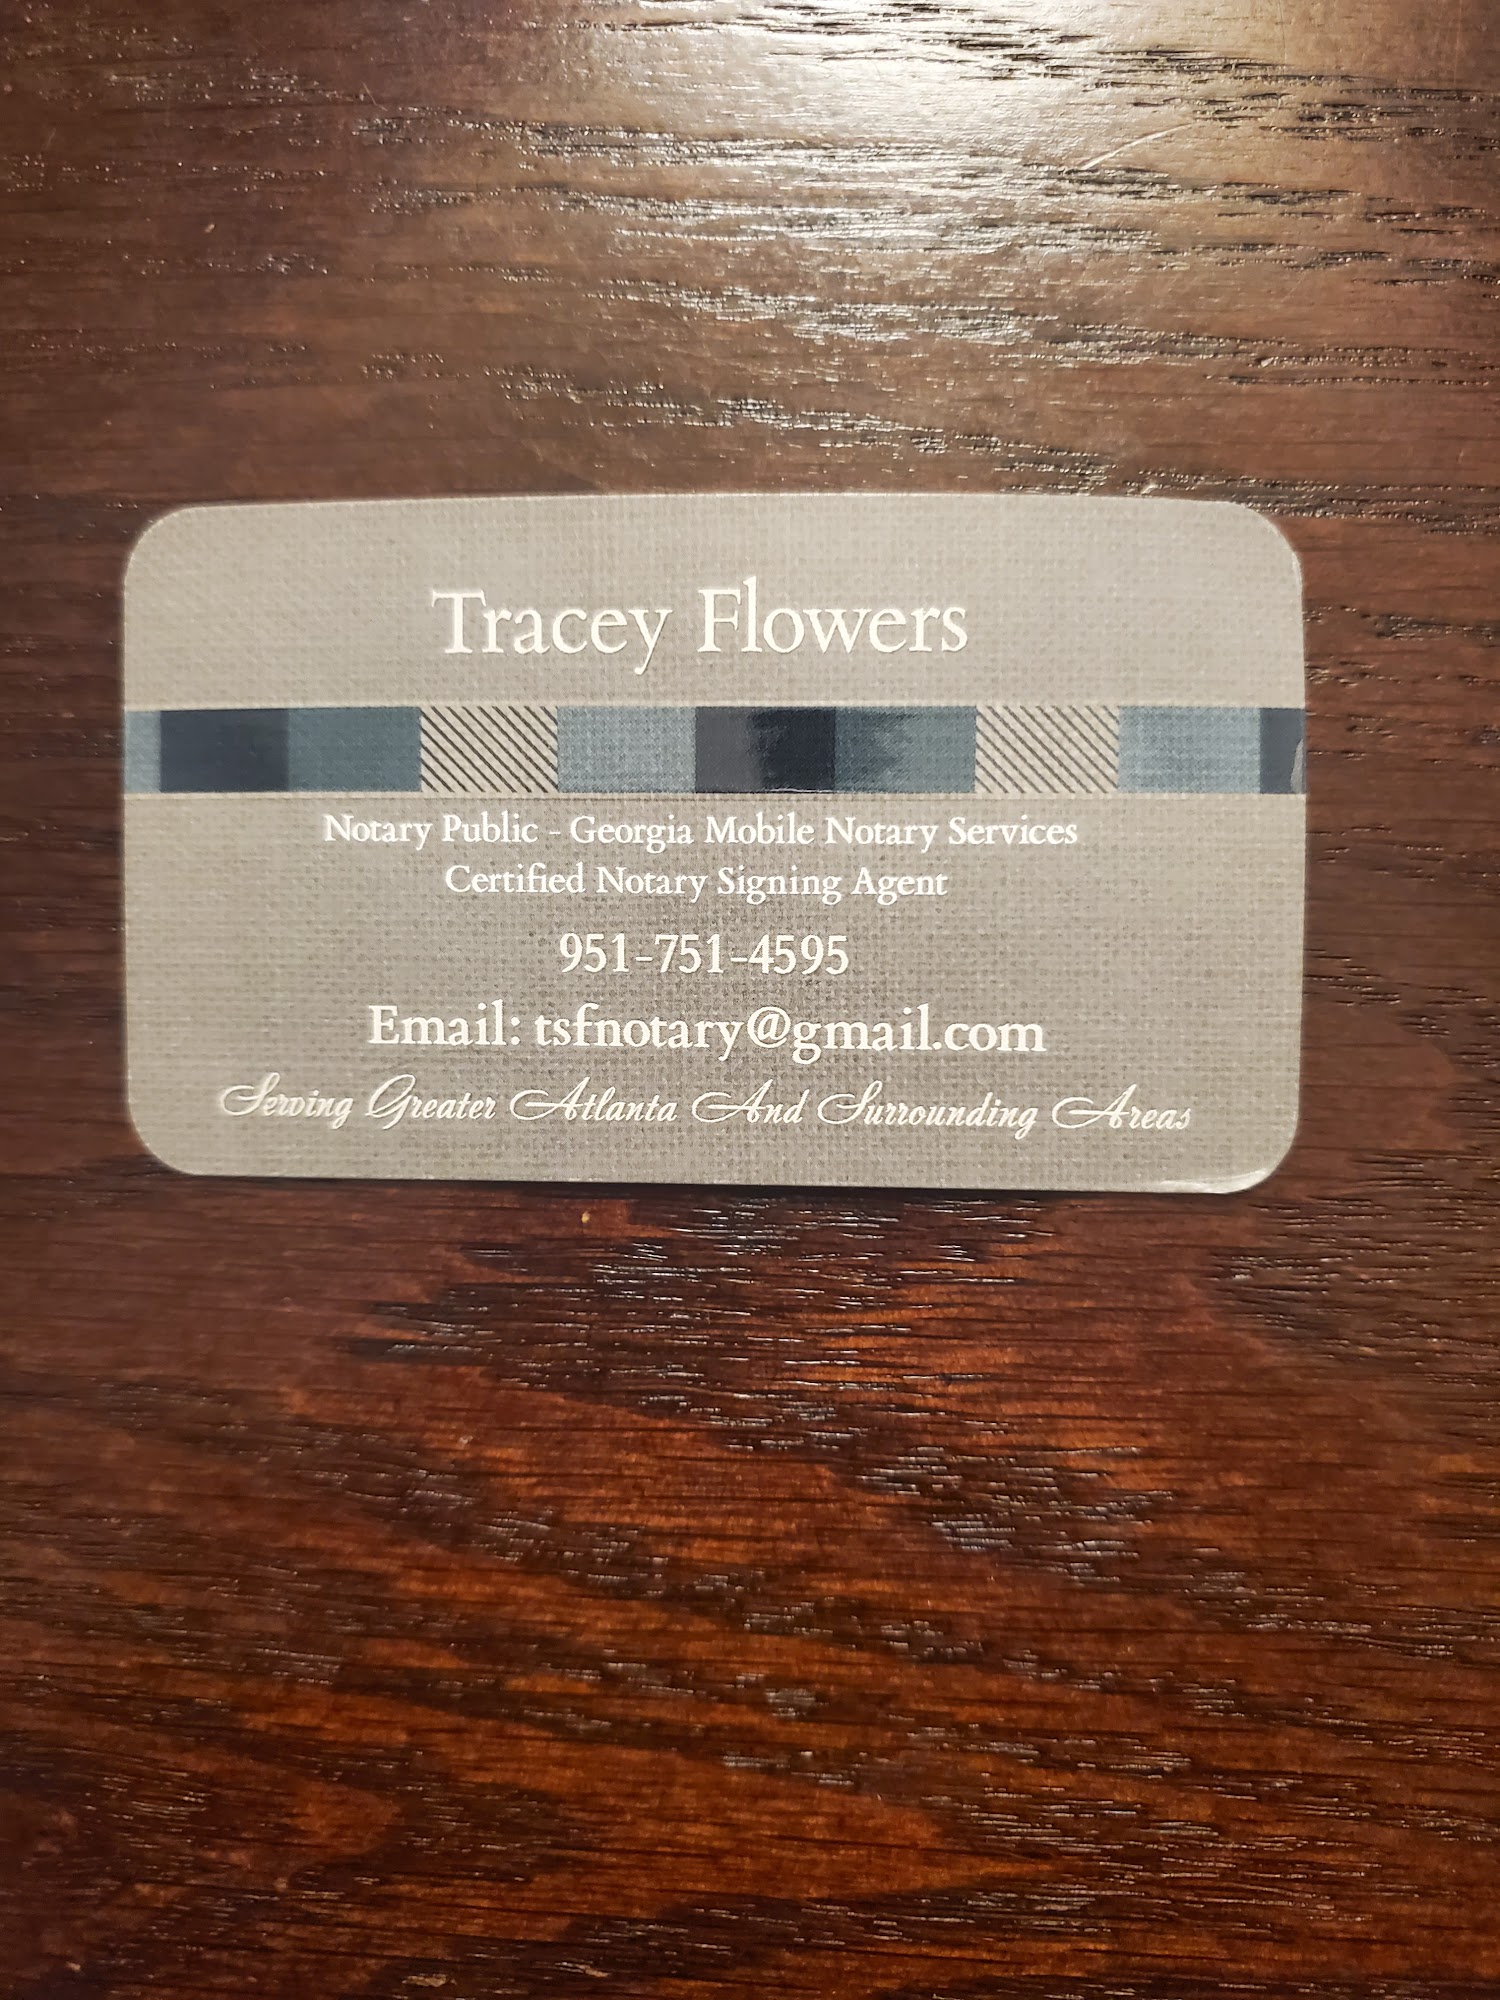 Tracey Flowers Mobile Notary Services